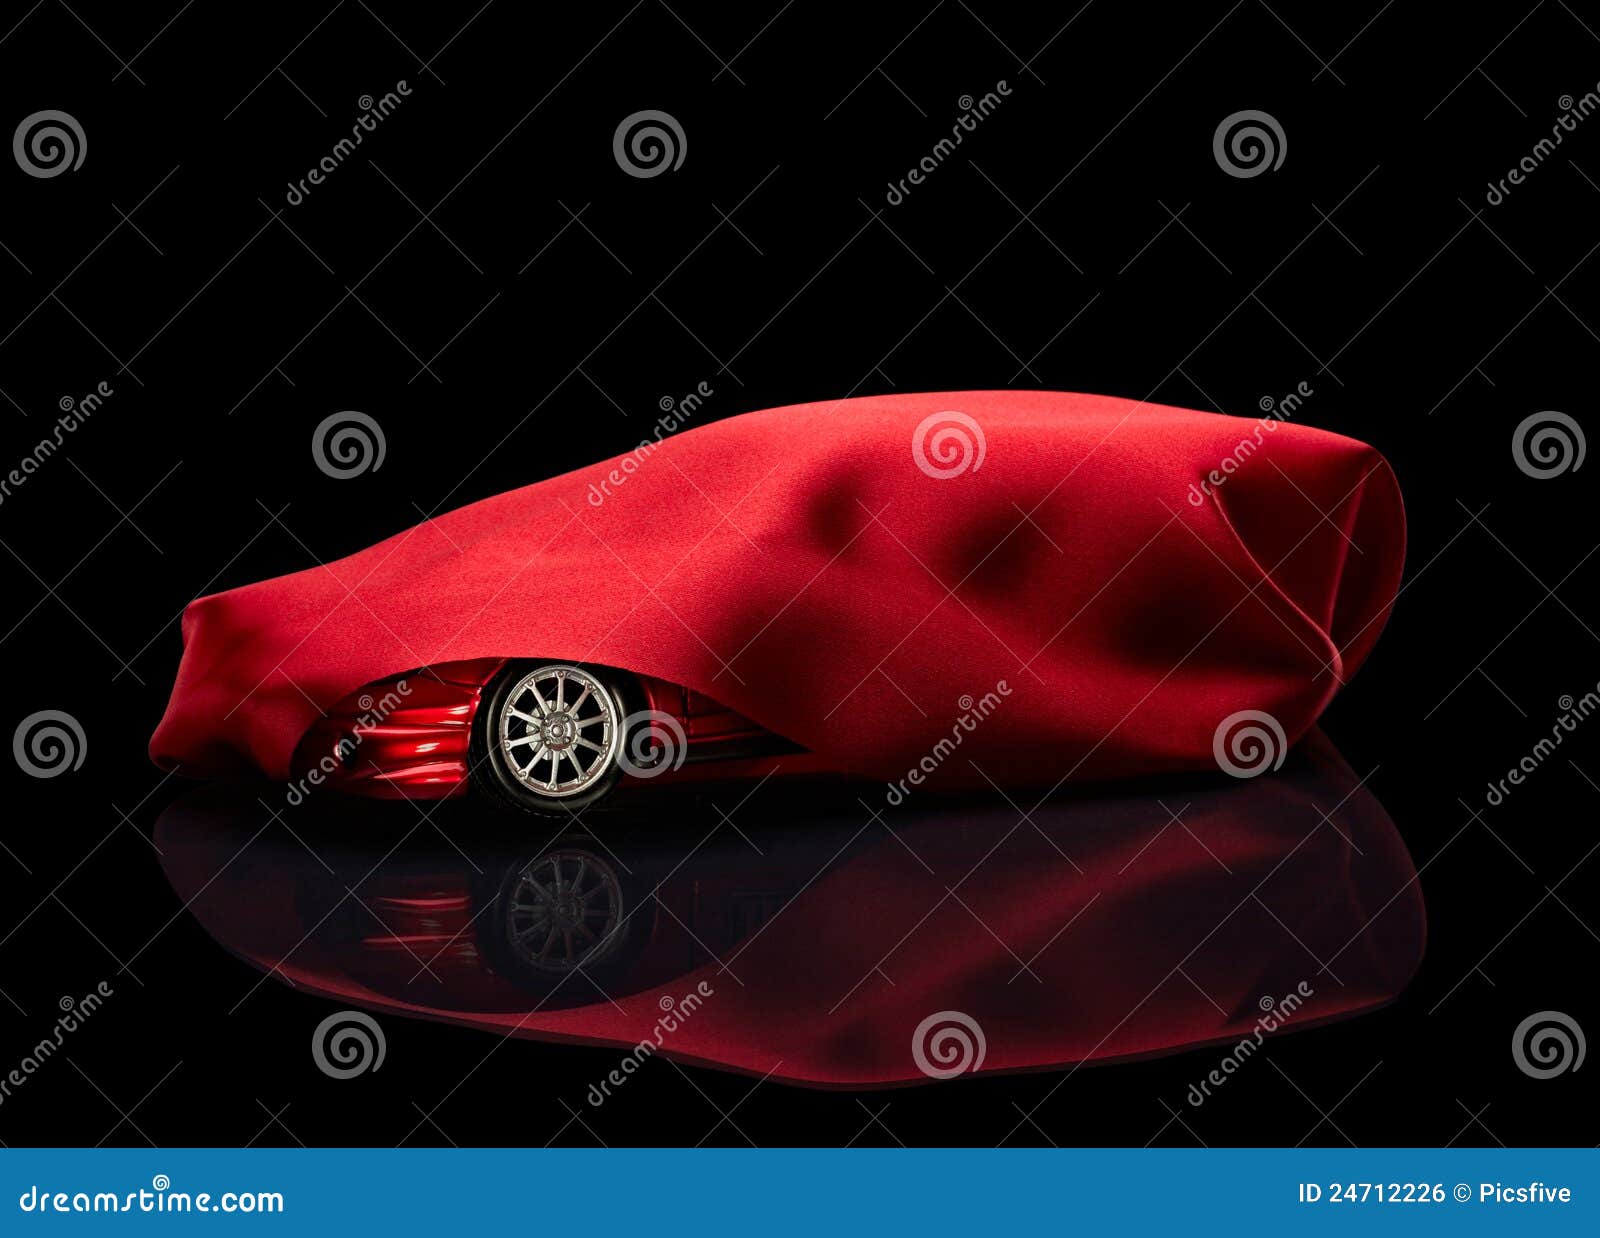 new car hidden under red cover